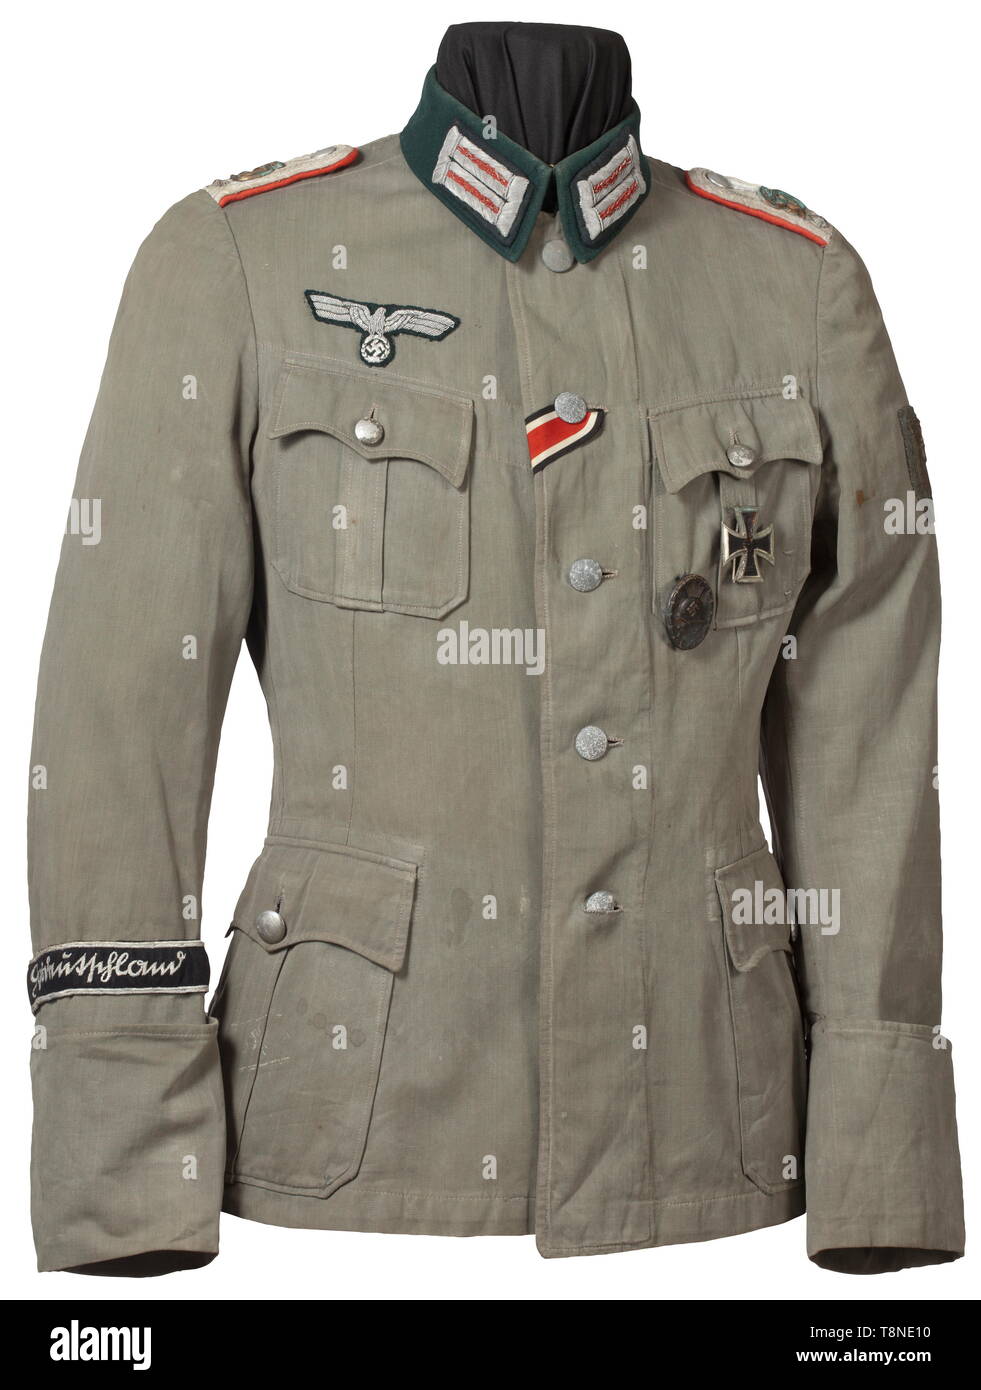 A field tunic for an Oberleutnant in Artillery Regiment 'Großdeutschland' Summer coat of field grey linen, in unlined issue with dark green collar and insignia for an officer. The shoulder boards with gold 'GD' appliqués, the cuff title in black velveteen with silver edge braid and silver-embroidered inscription 'Großdeutschland' in Sütterlin script. Stitched-on Krim Shield, affixed EK 1 and a Wound Badge in Black. An obviously used coat with storage-caused (oxidation) signs of age in never-cleaned condition. Included is the Soldbuch (Paybook) wi, Additional-Rights-Clearance-Info-Not-Available Stock Photo